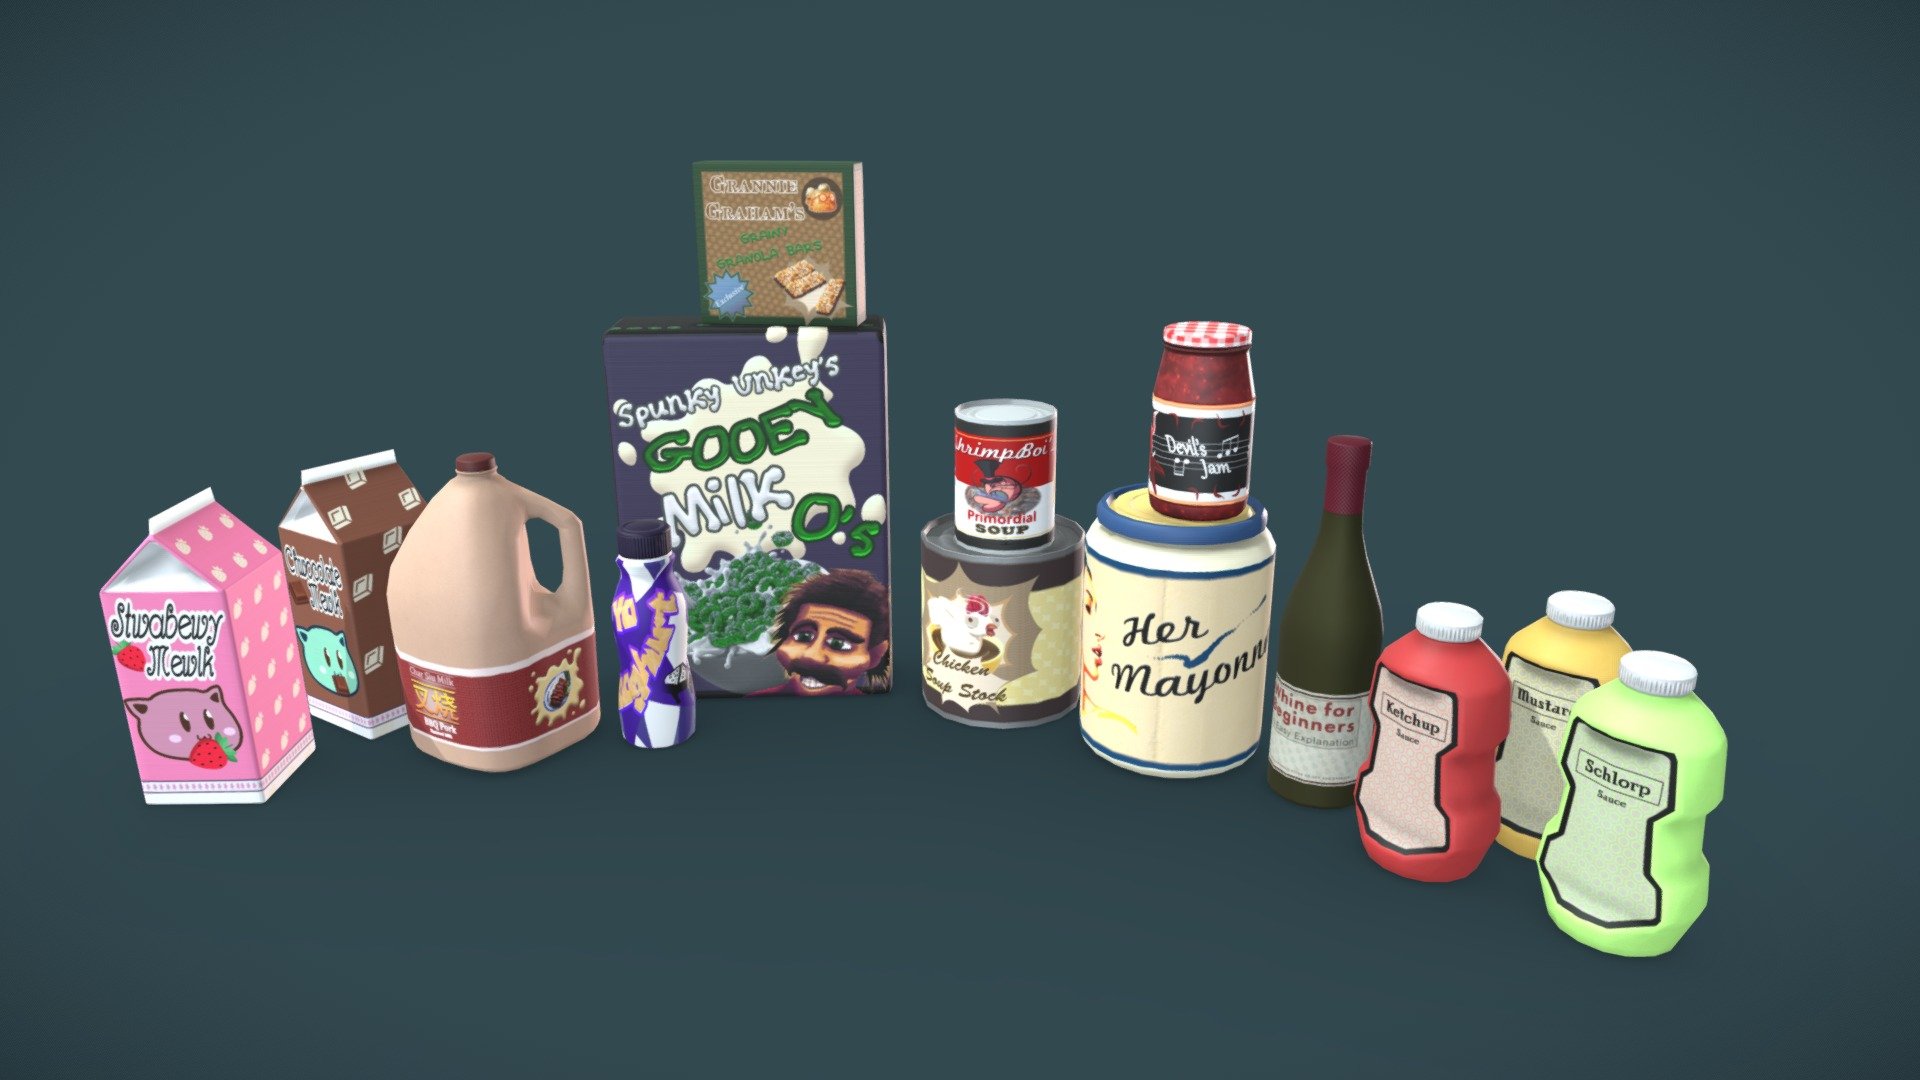 This are some of the products I developed for our Final Student Project Game at VFS.

Space Age: Minimum Wage is a 3D, first person cashier management game where you play as an employee of an intergalactic grocery store, and try to survive until the end of your very fist shift.

If you guys wanna give the game a try you can download and play for free from the VFS arcade:
http://community.vfs.com/arcade/game/space-ageminimum-wage/

As a team we came up with many ideas for making fun, wierd &amp; recognizable products for our Space Super Store. Then we made many 3D models keeping them low poly for performance optimizing but with separate textures to diminish aliasing issues.

I used Maya for 3D Modeling and UVing, Photoshop for drawing and photobashing fonts and visual assets and Substance Painter for Texturing 3d model